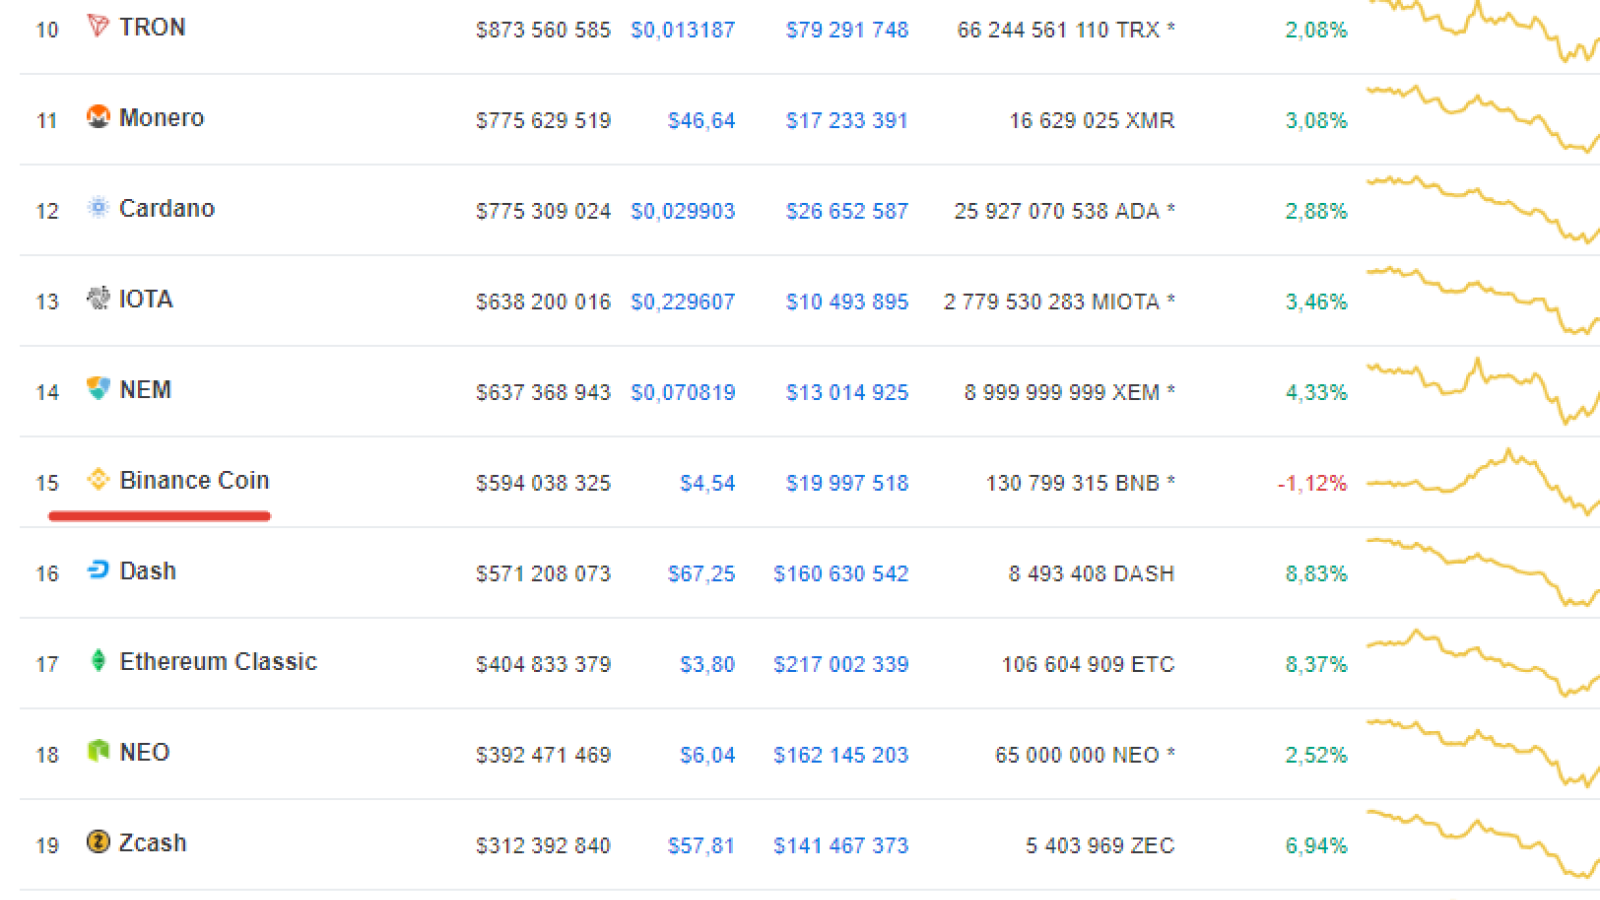 Coin shift on the top-10 list